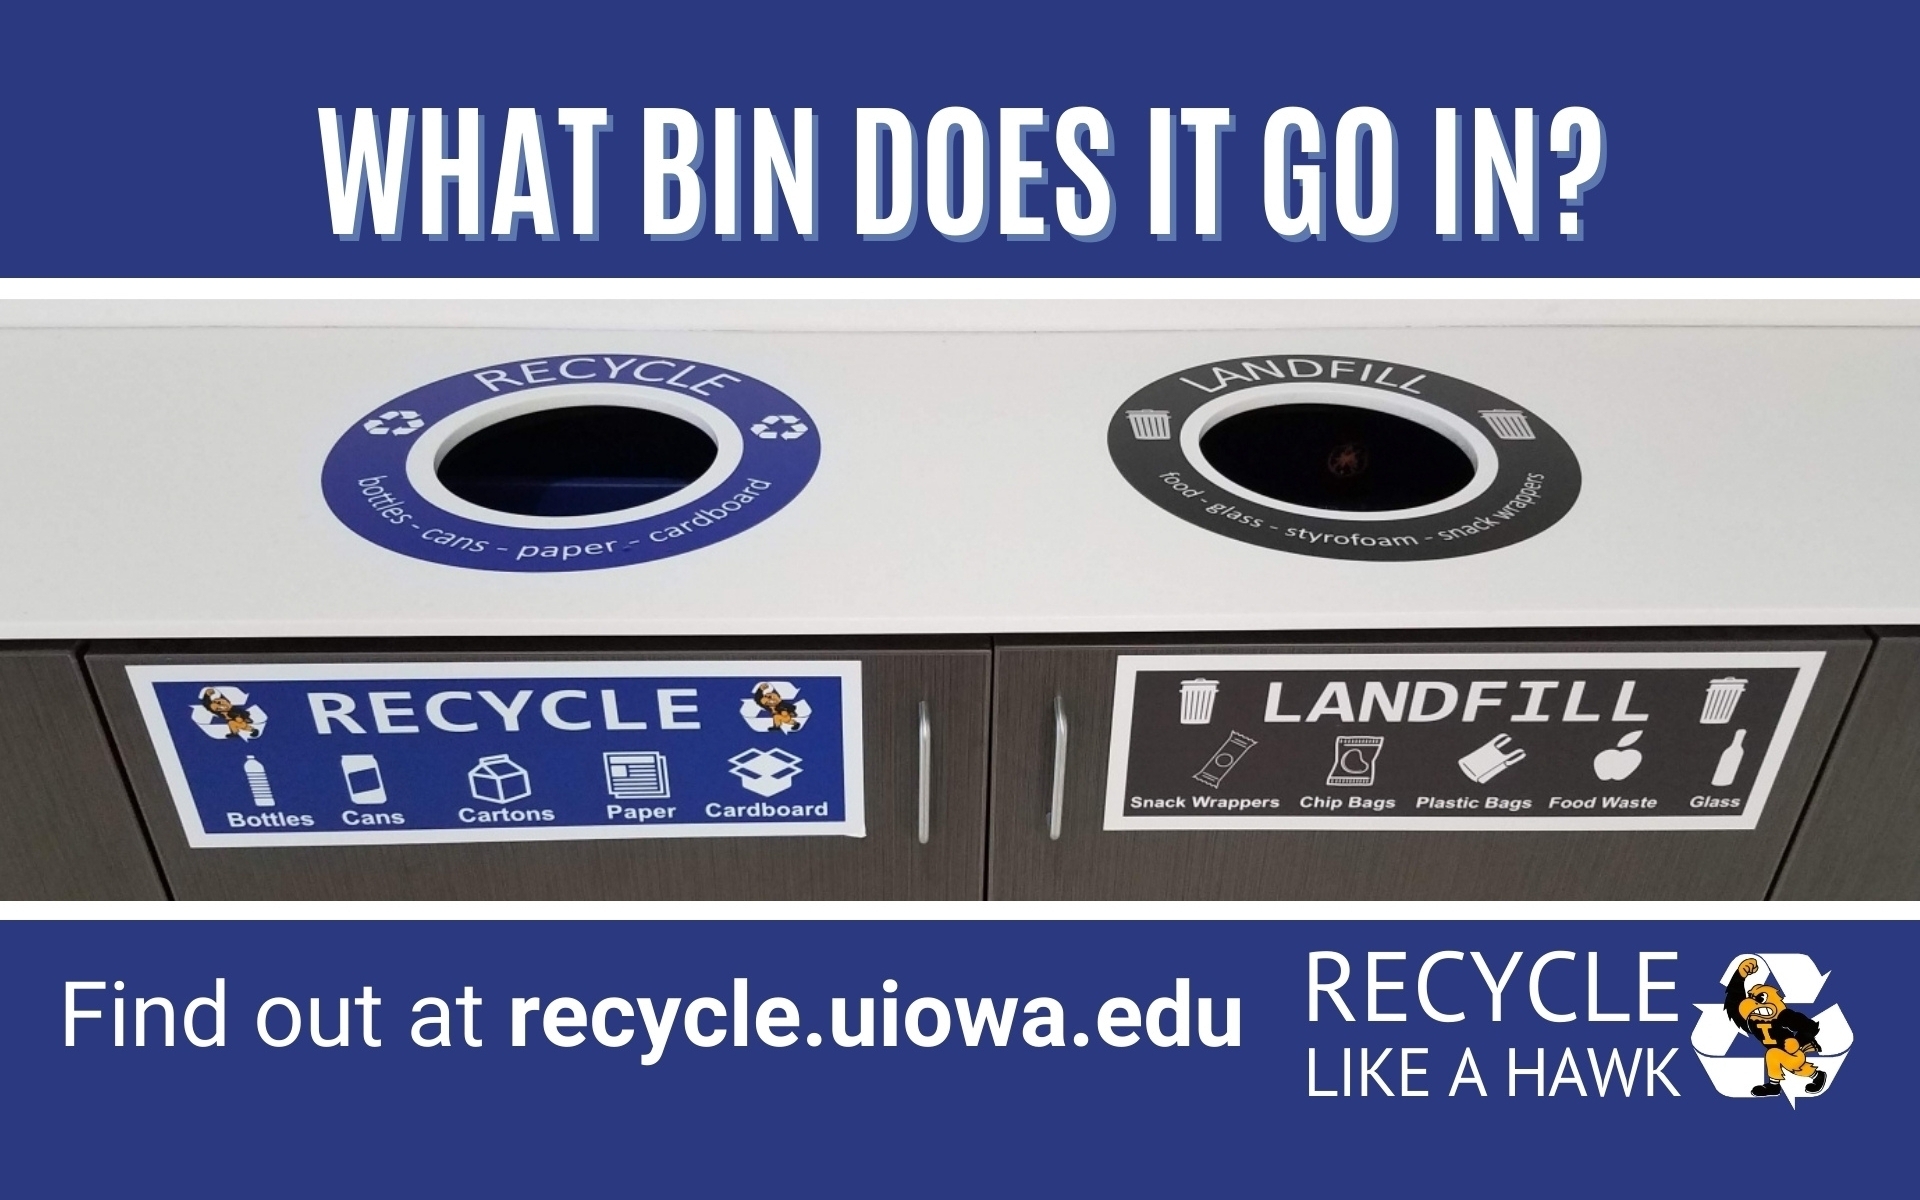 What Bin Does It Go In? Find out at recycle.uiowa.edu